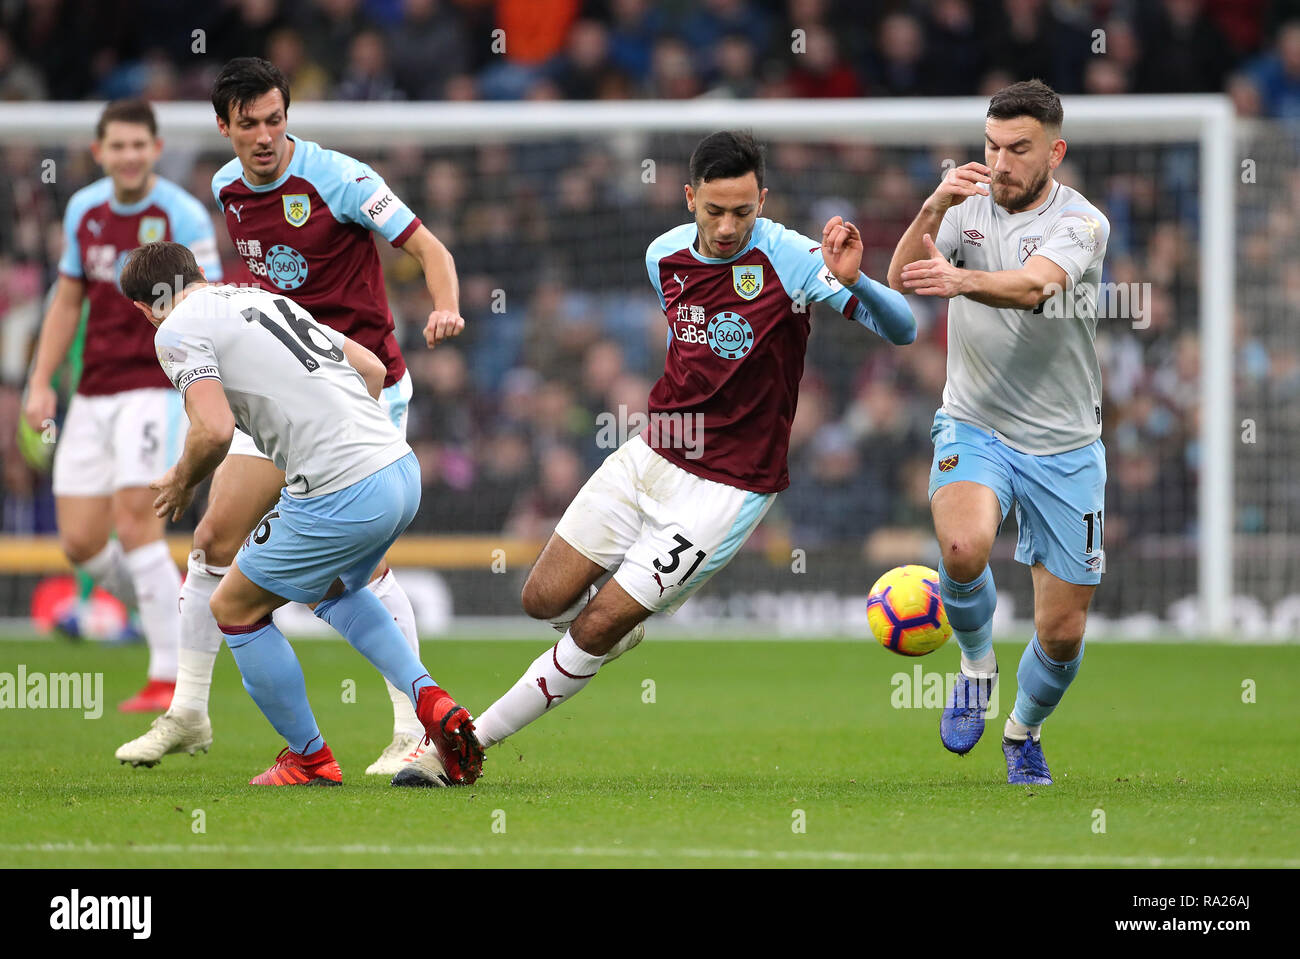 Burnley's Dwight McNeil (centre) and West Ham United's Robert Snodgrass (right) battle for the ball during the Premier League match at Turf Moor, Burnley. Stock Photo